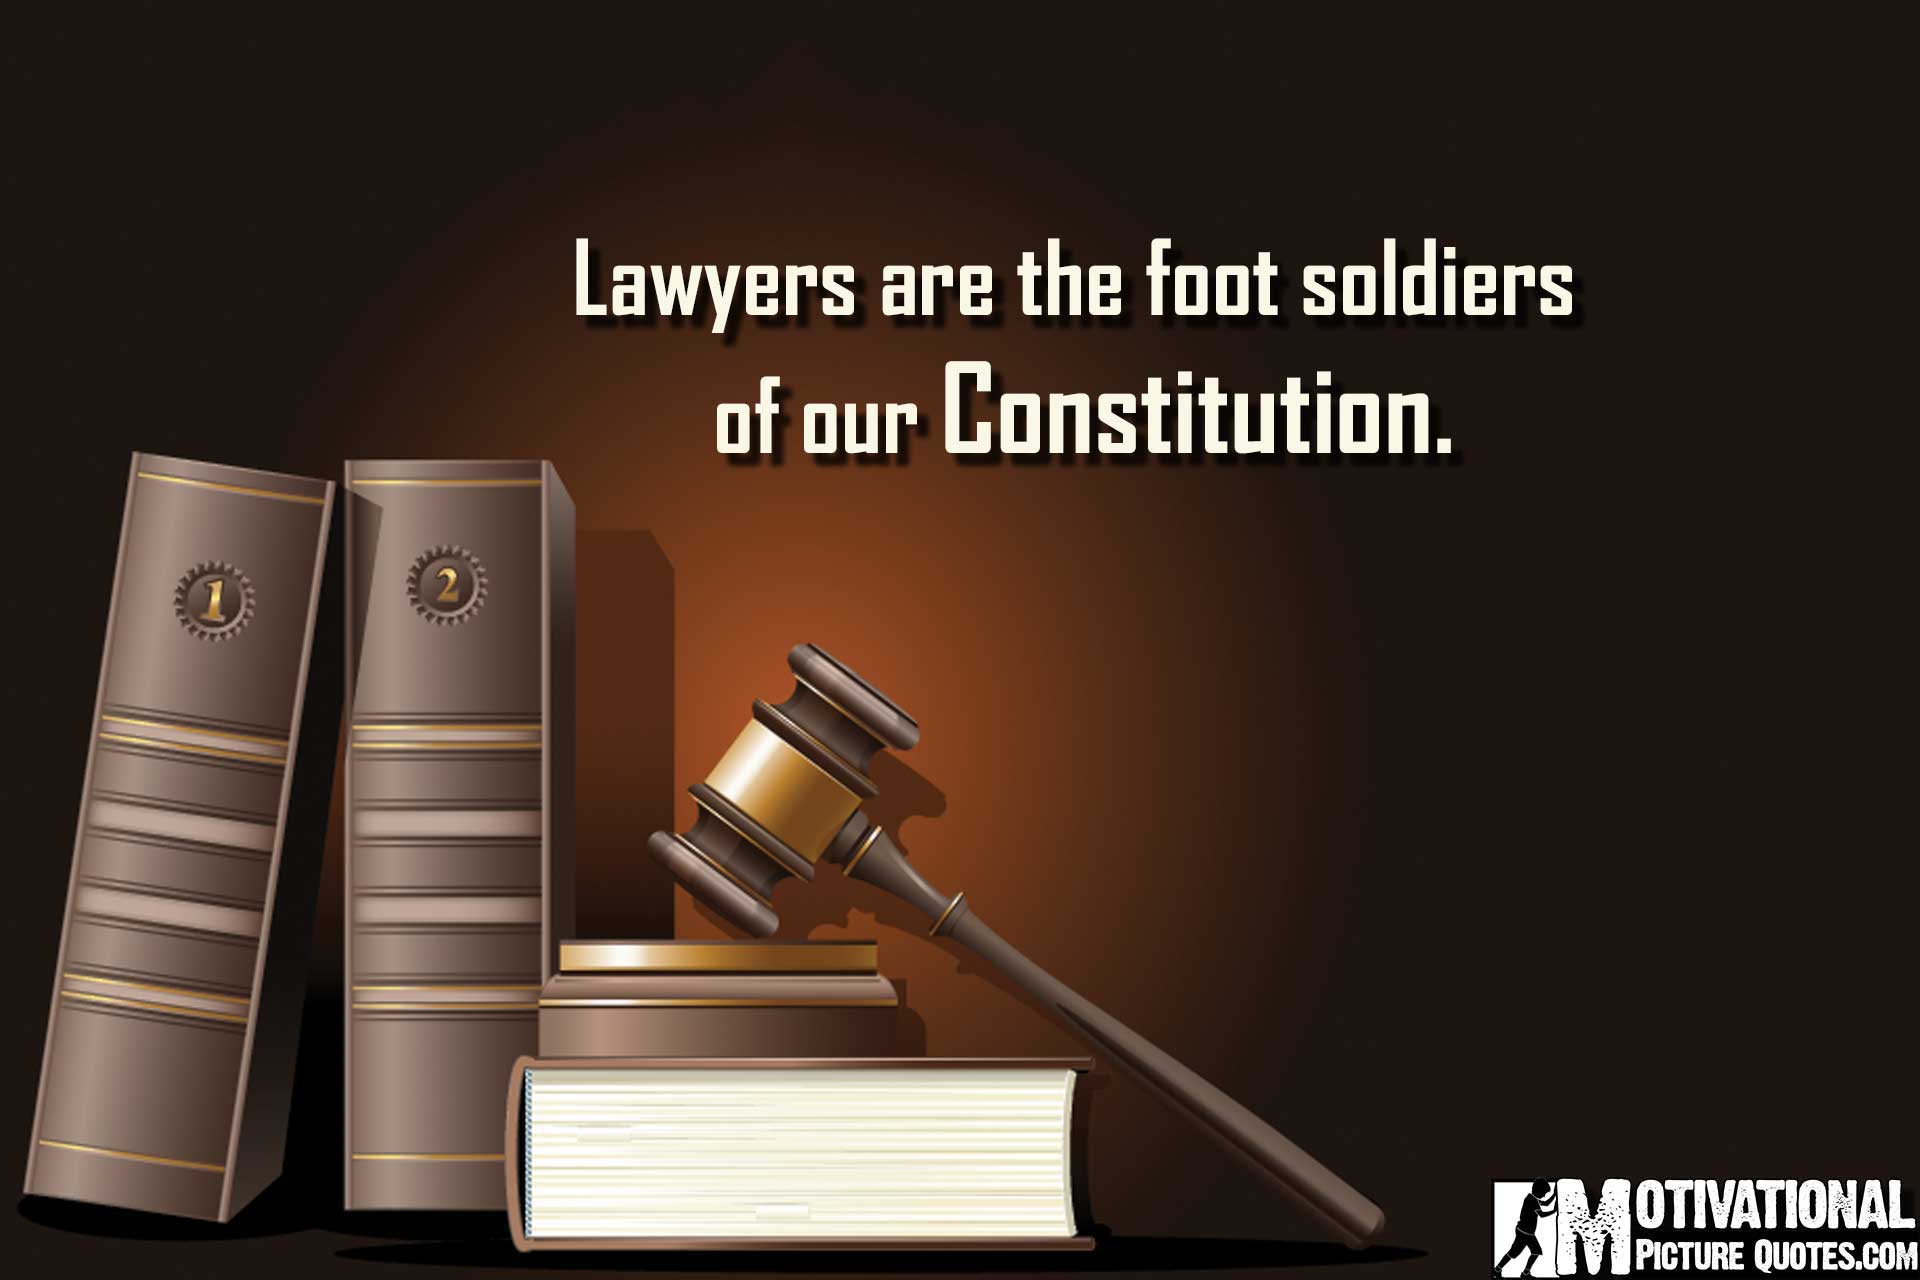 Only am law